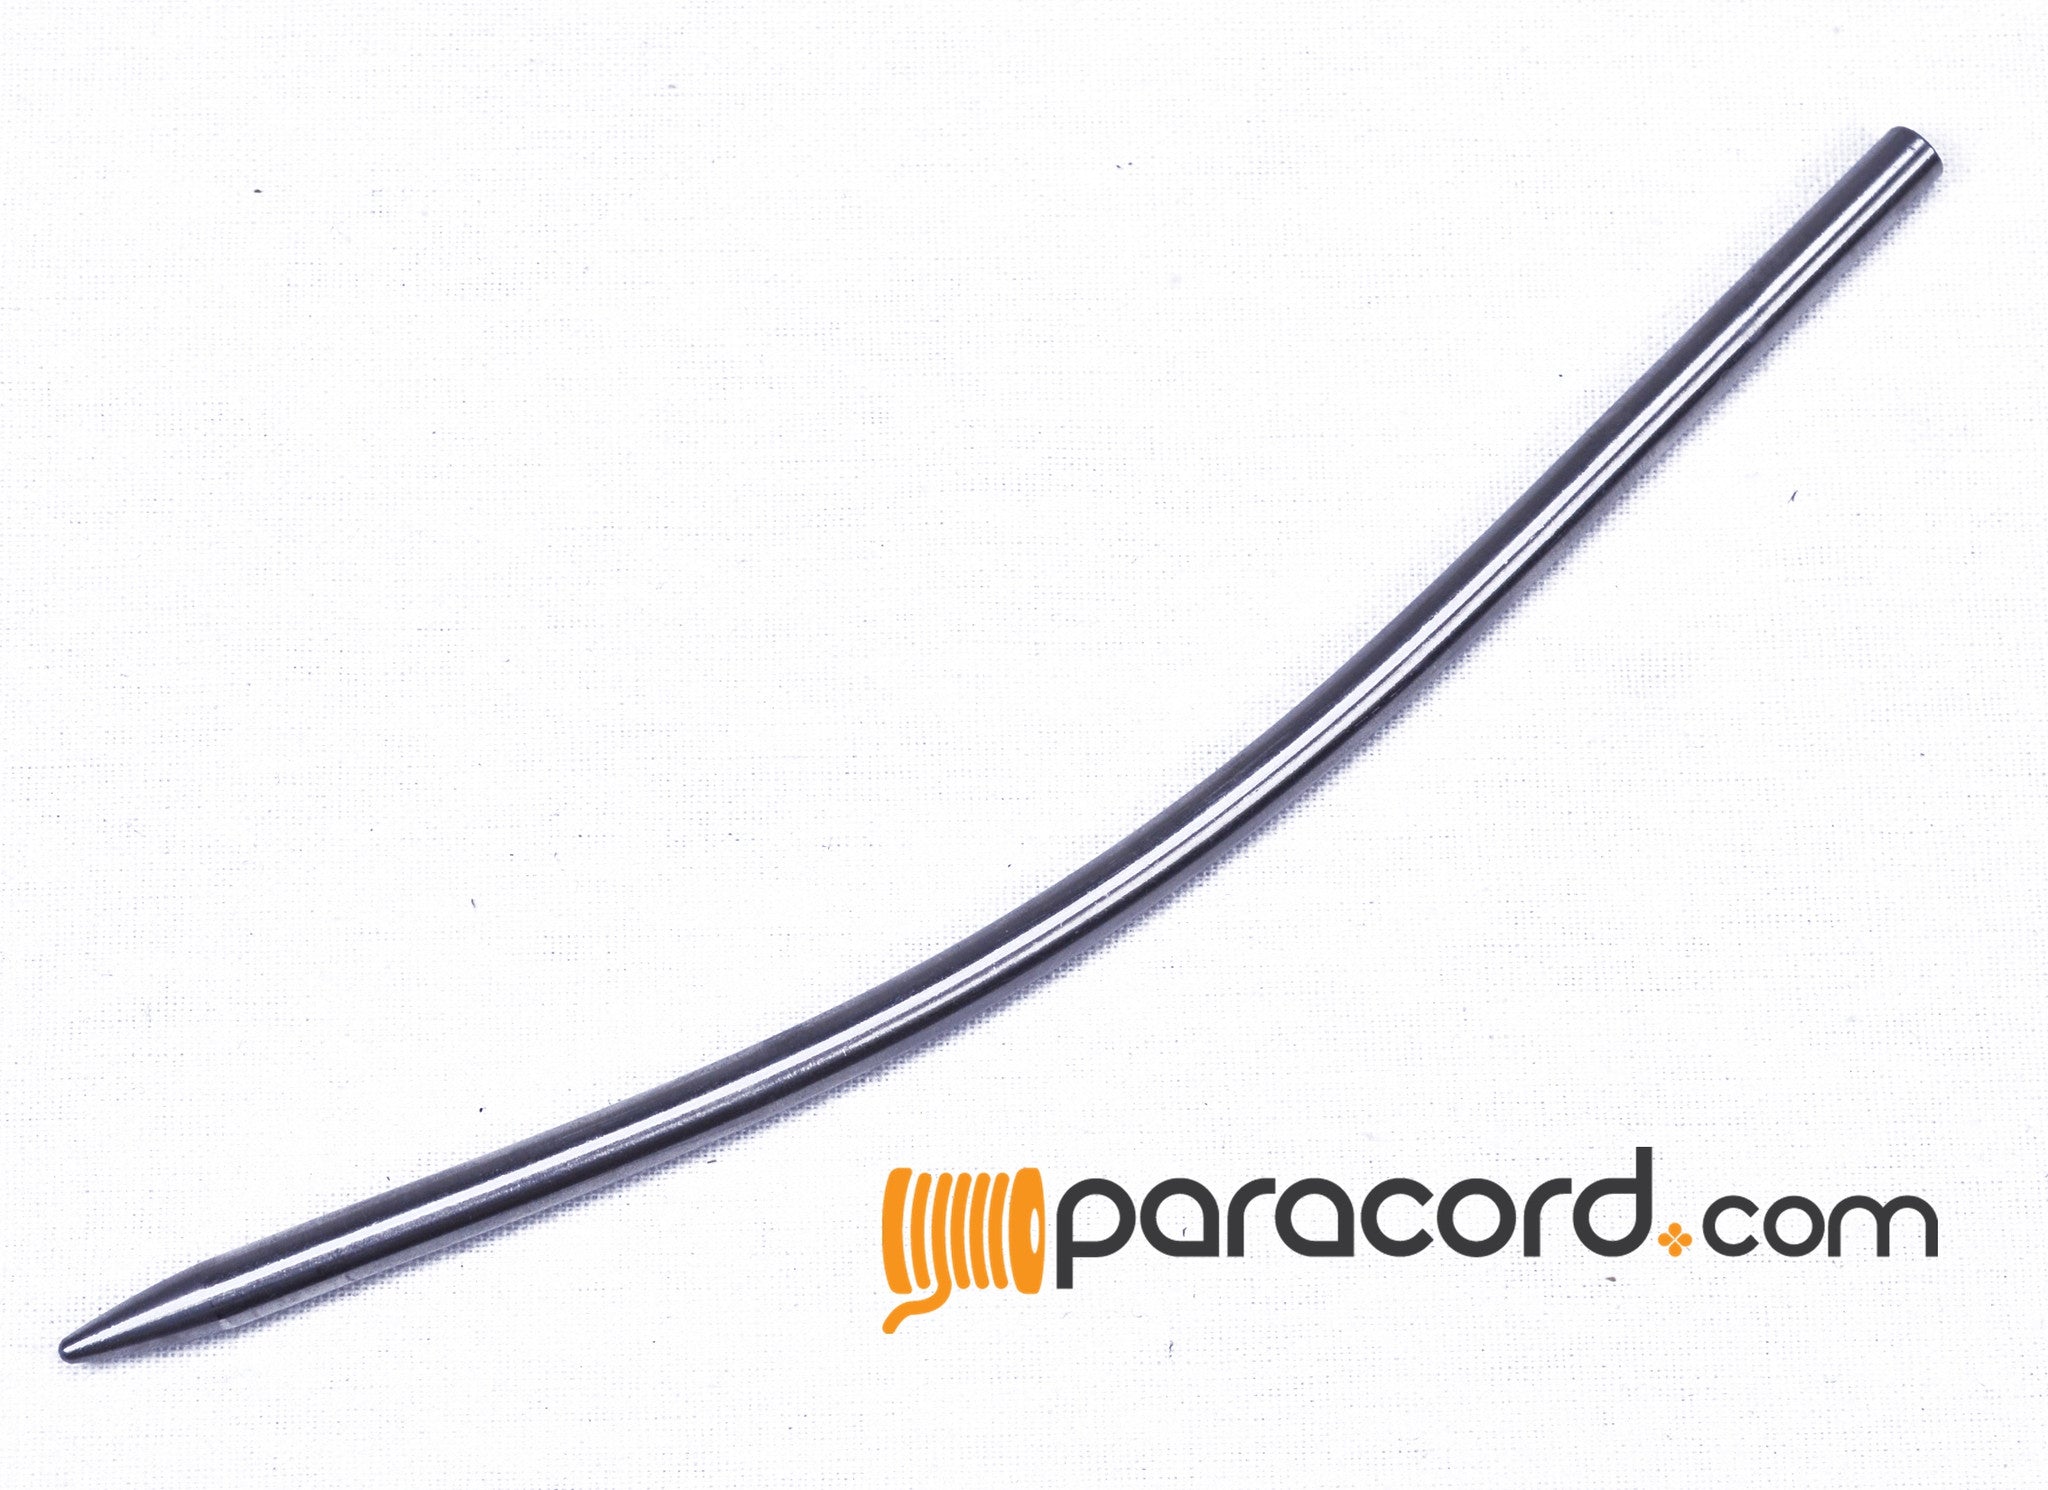 2) 5 1/4 STAINLESS 550# PARACORD FID, LACING, STITCHING NEEDLE